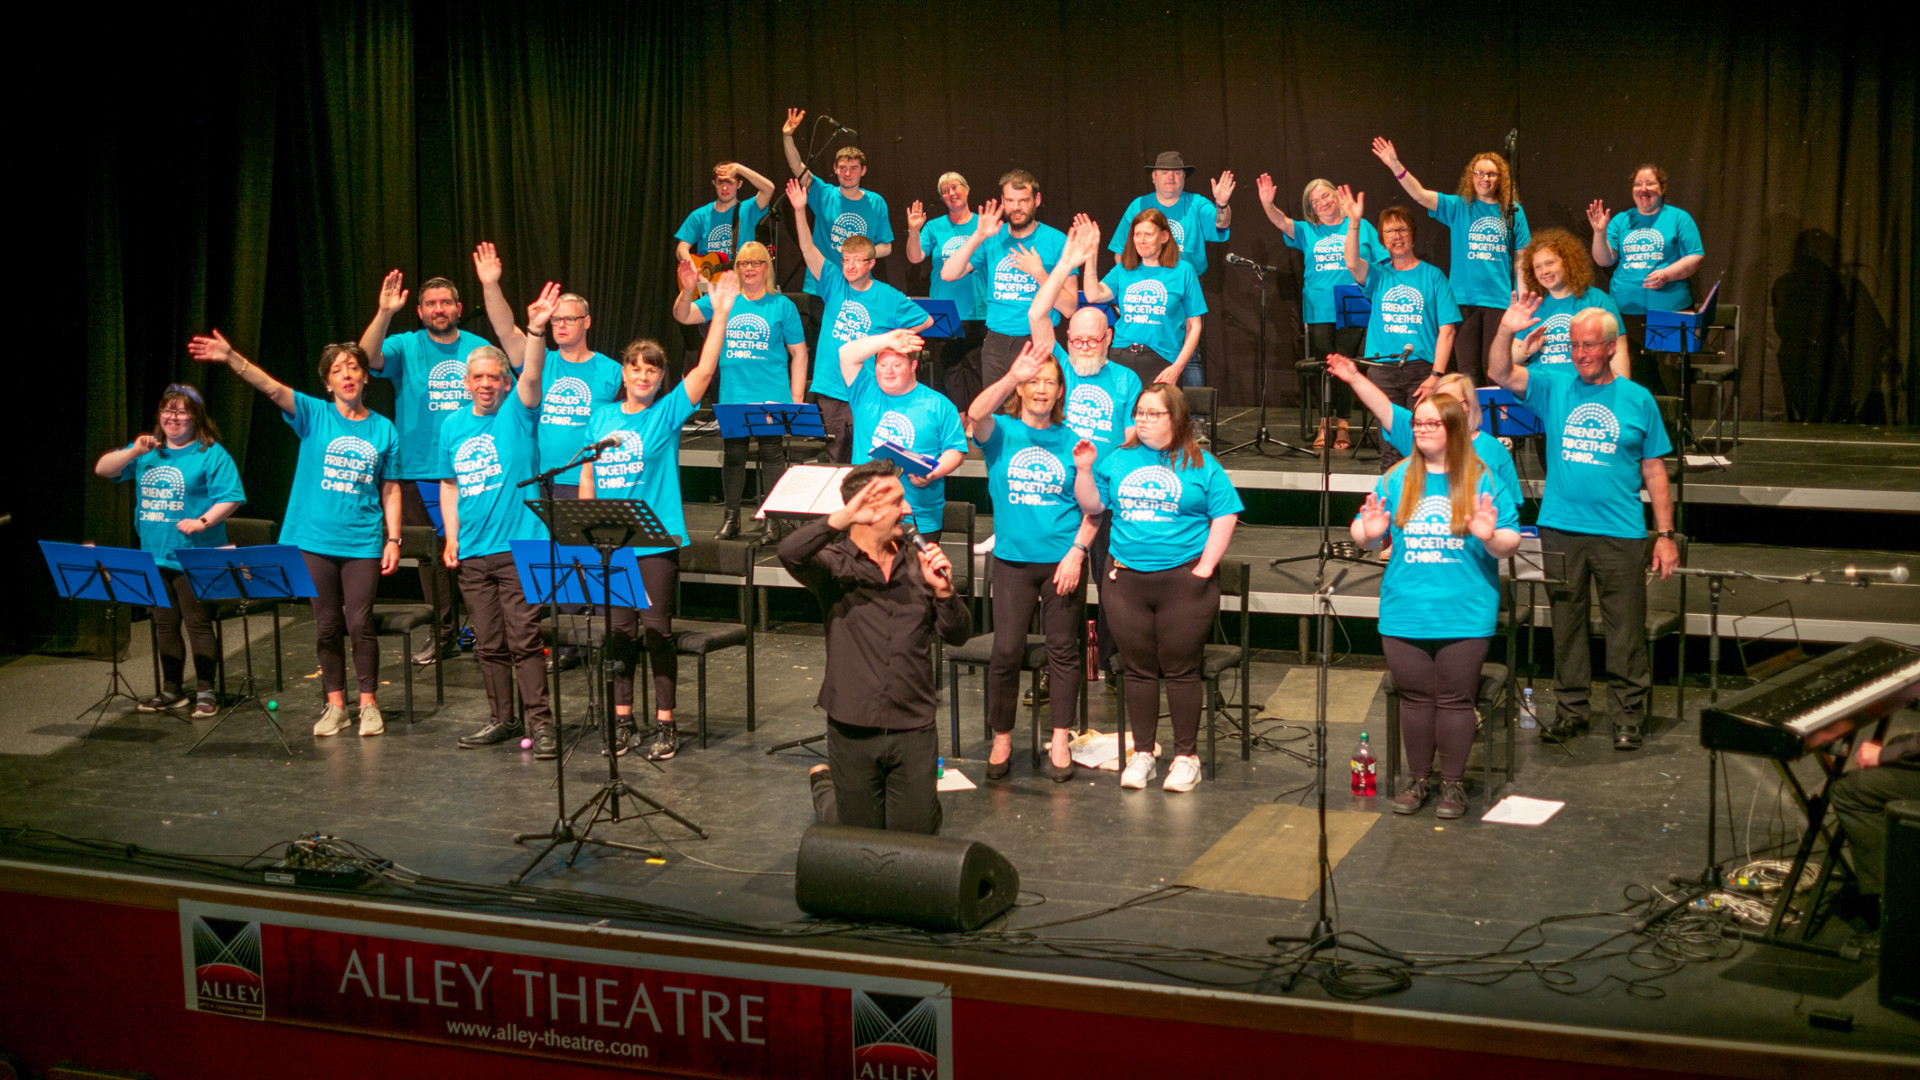 ‘Friends Together’ choir hit the high notes in Strabane